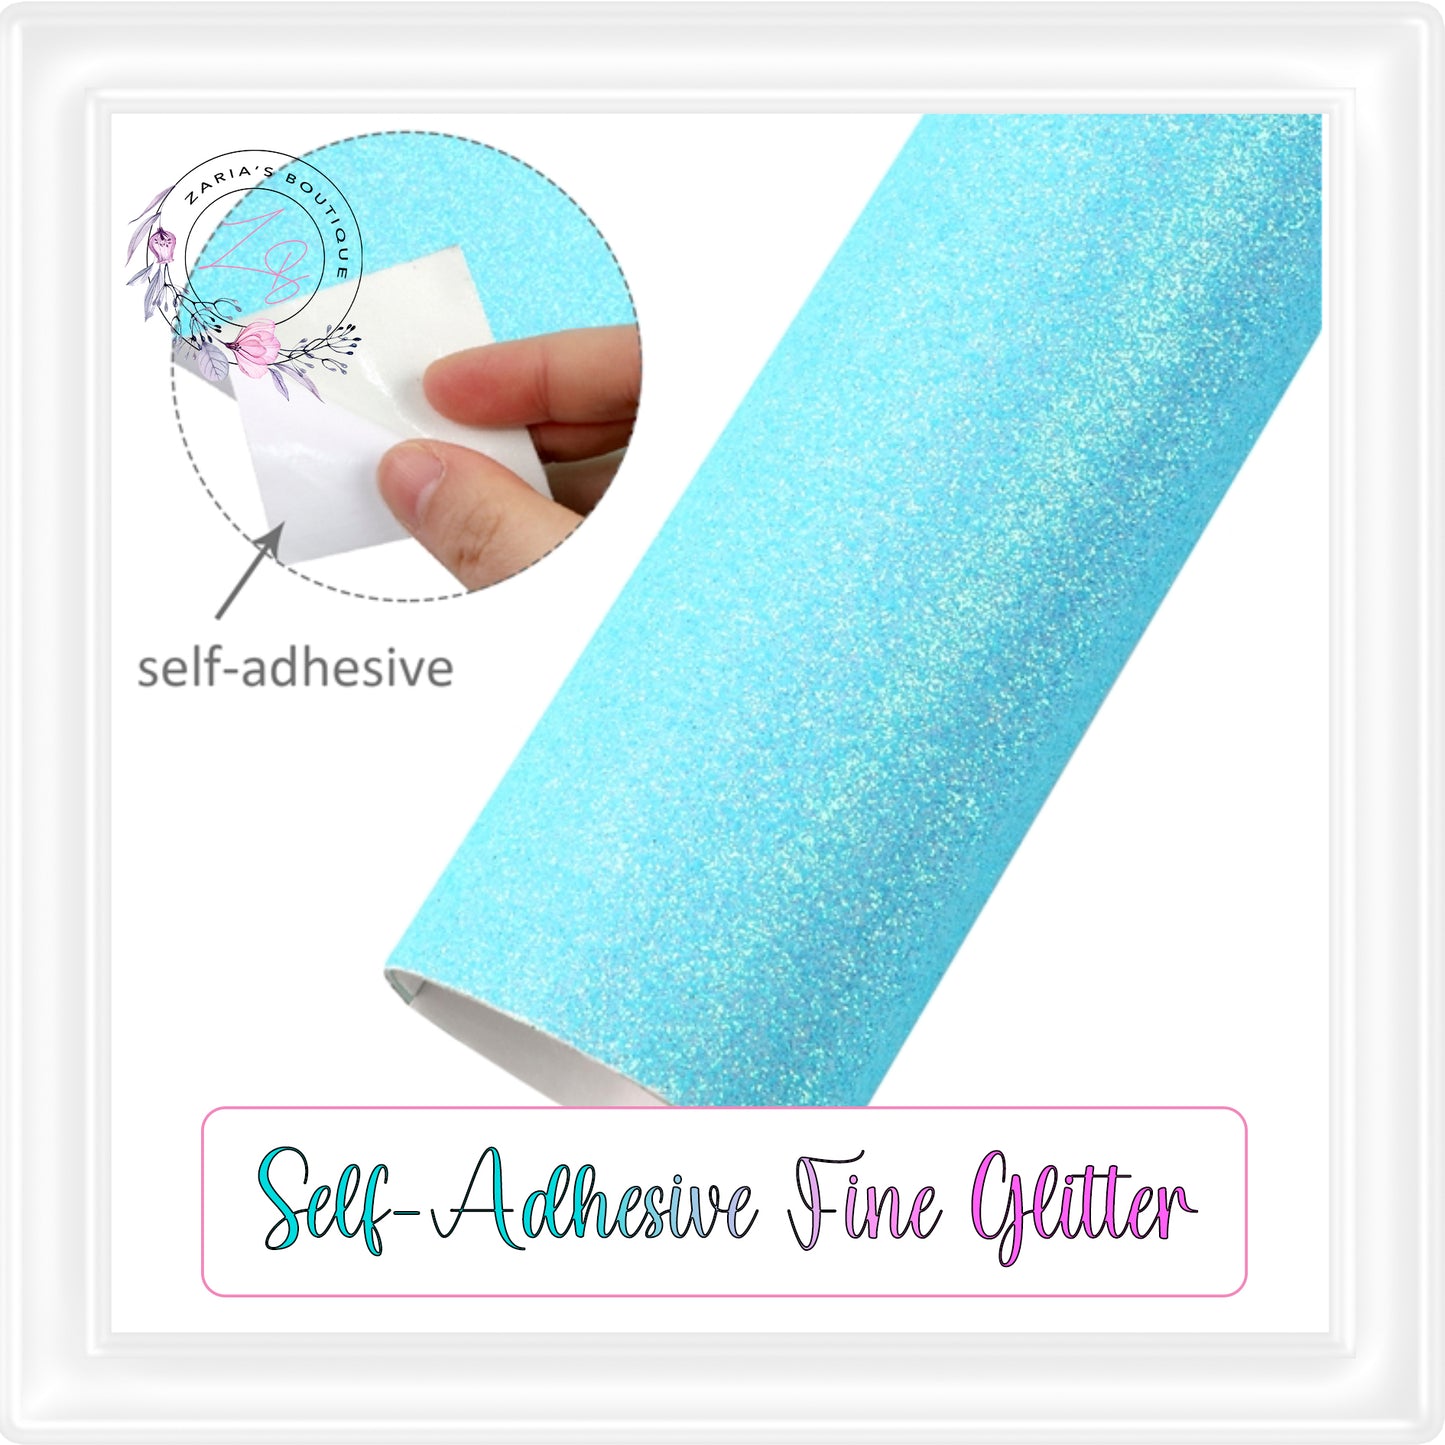 ⋅ Self-Adhesive Backed Fine Glitter ⋅ For Double-Sided Projects ⋅ BLUE ⋅